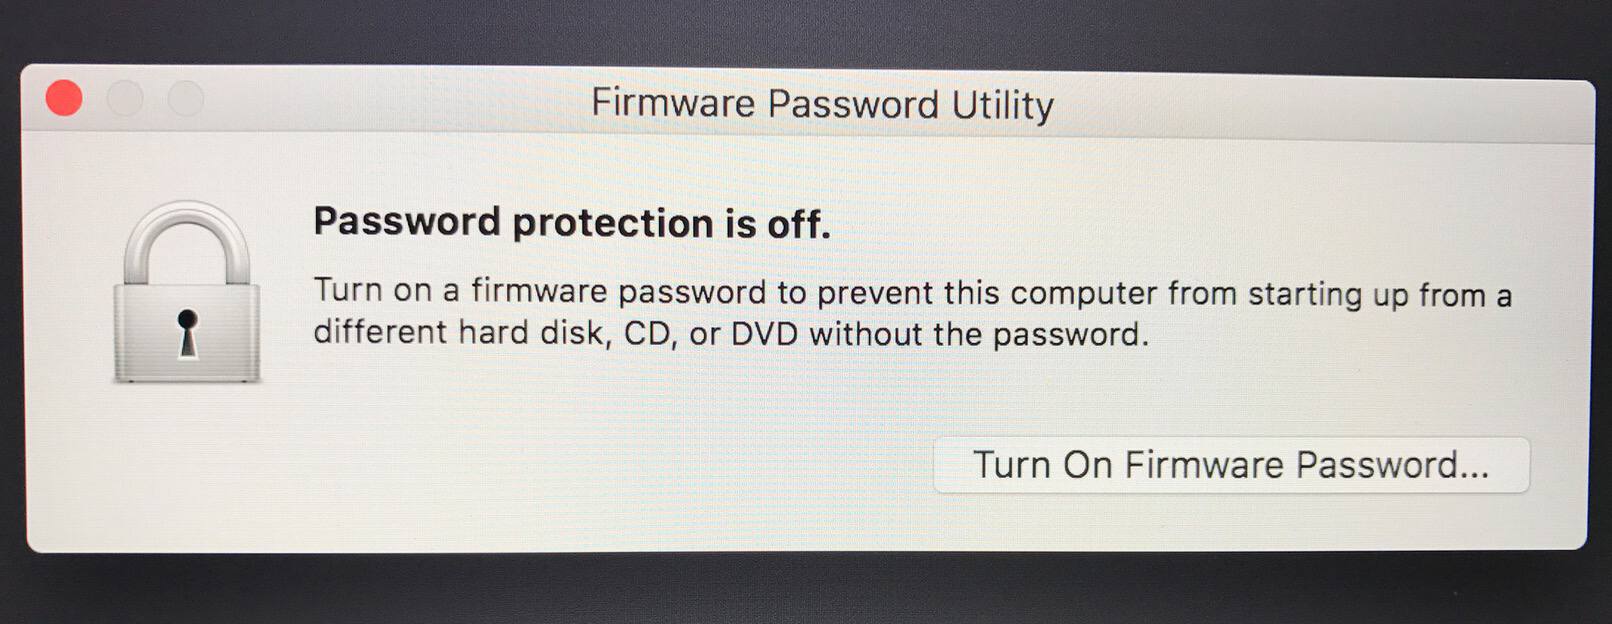 Turn On Firmware Password in the macOS Firmware Password Utility